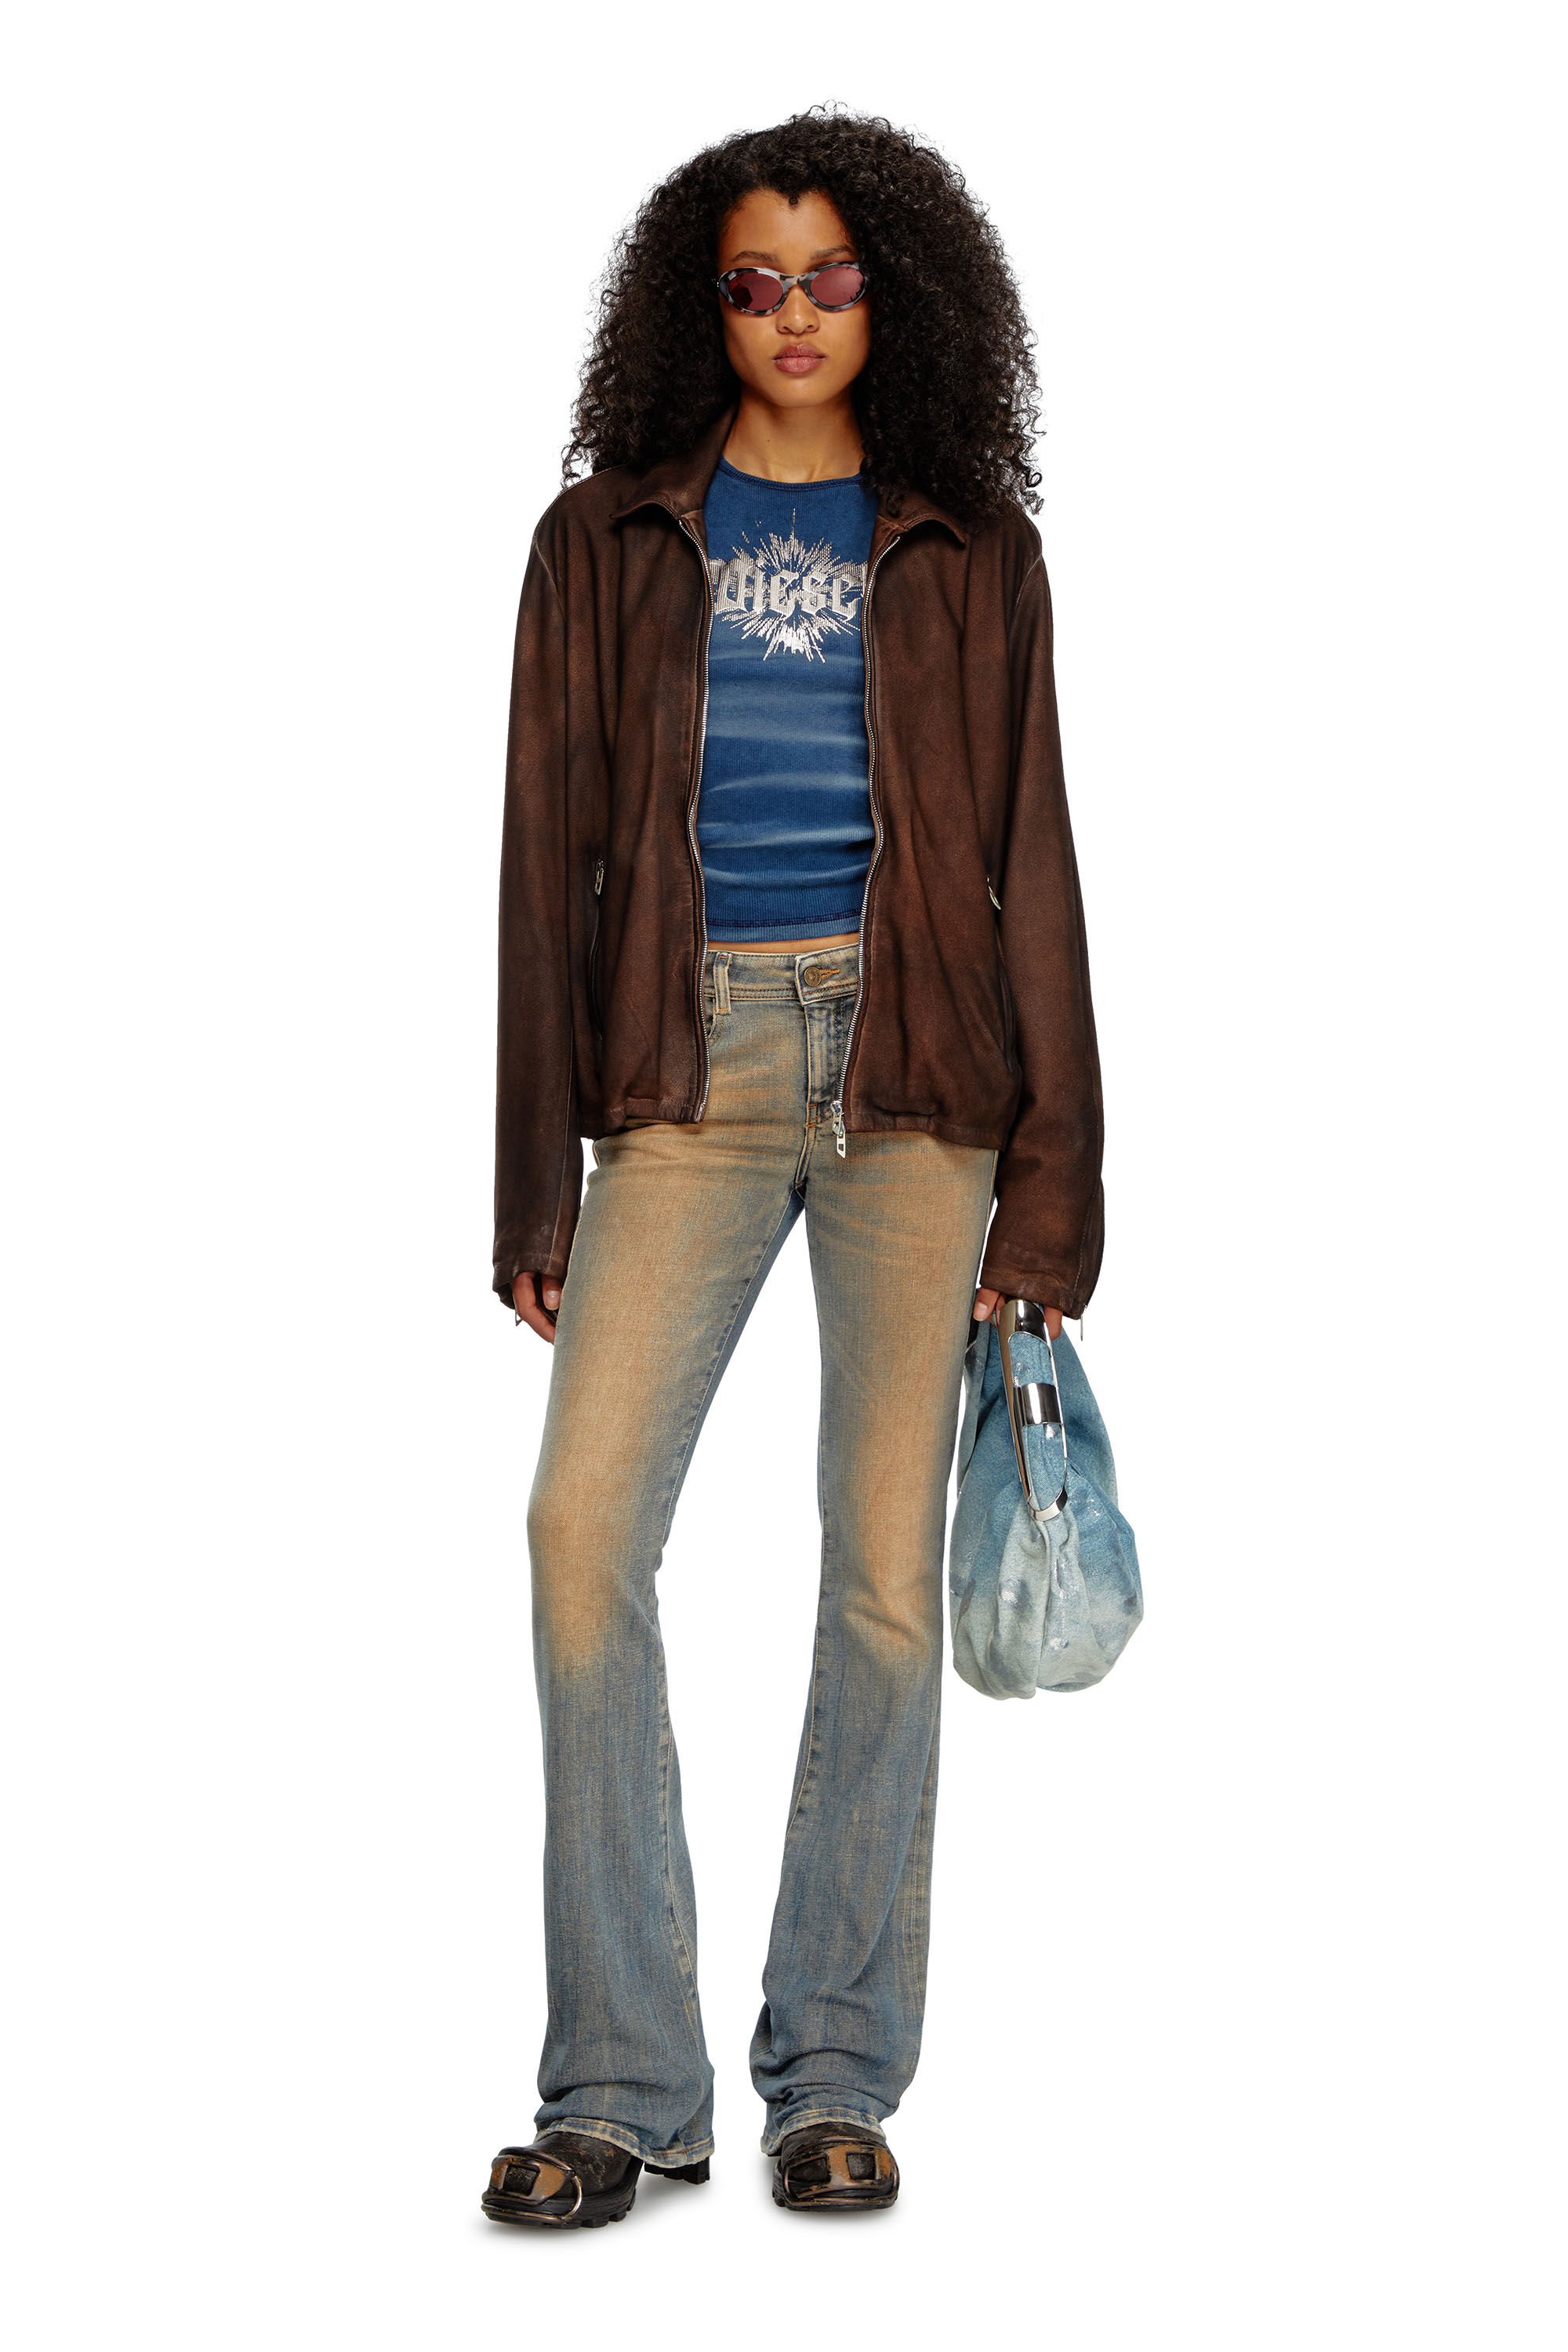 Diesel - Bootcut and Flare Jeans 1969 D-Ebbey 09J23, Mujer Bootcut y Flare Jeans - 1969 D-Ebbey in Azul marino - Image 1